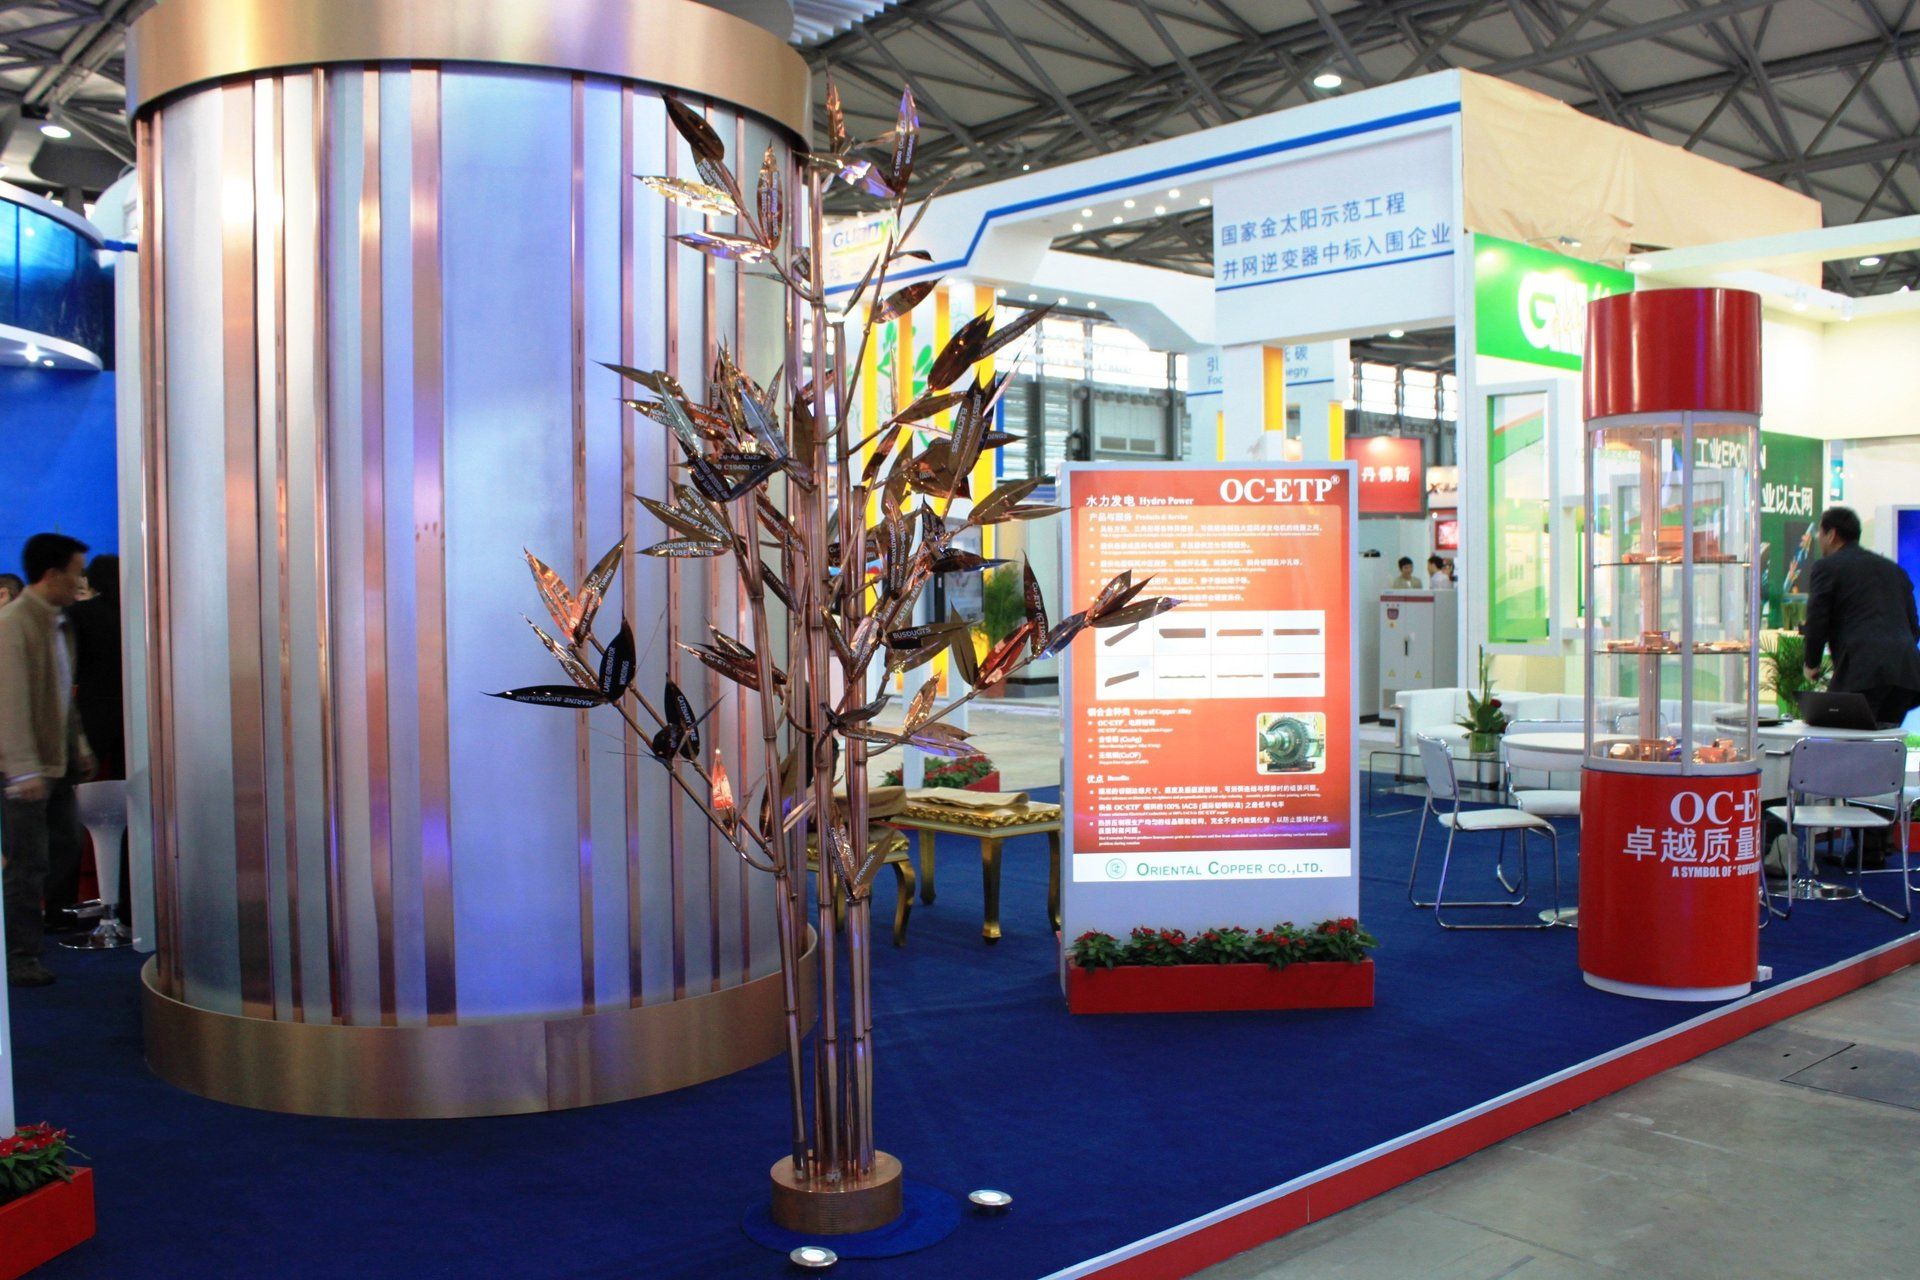 Oriental Copper @ China E-power 2011. Booth designed and built by Essential Global Fairs.